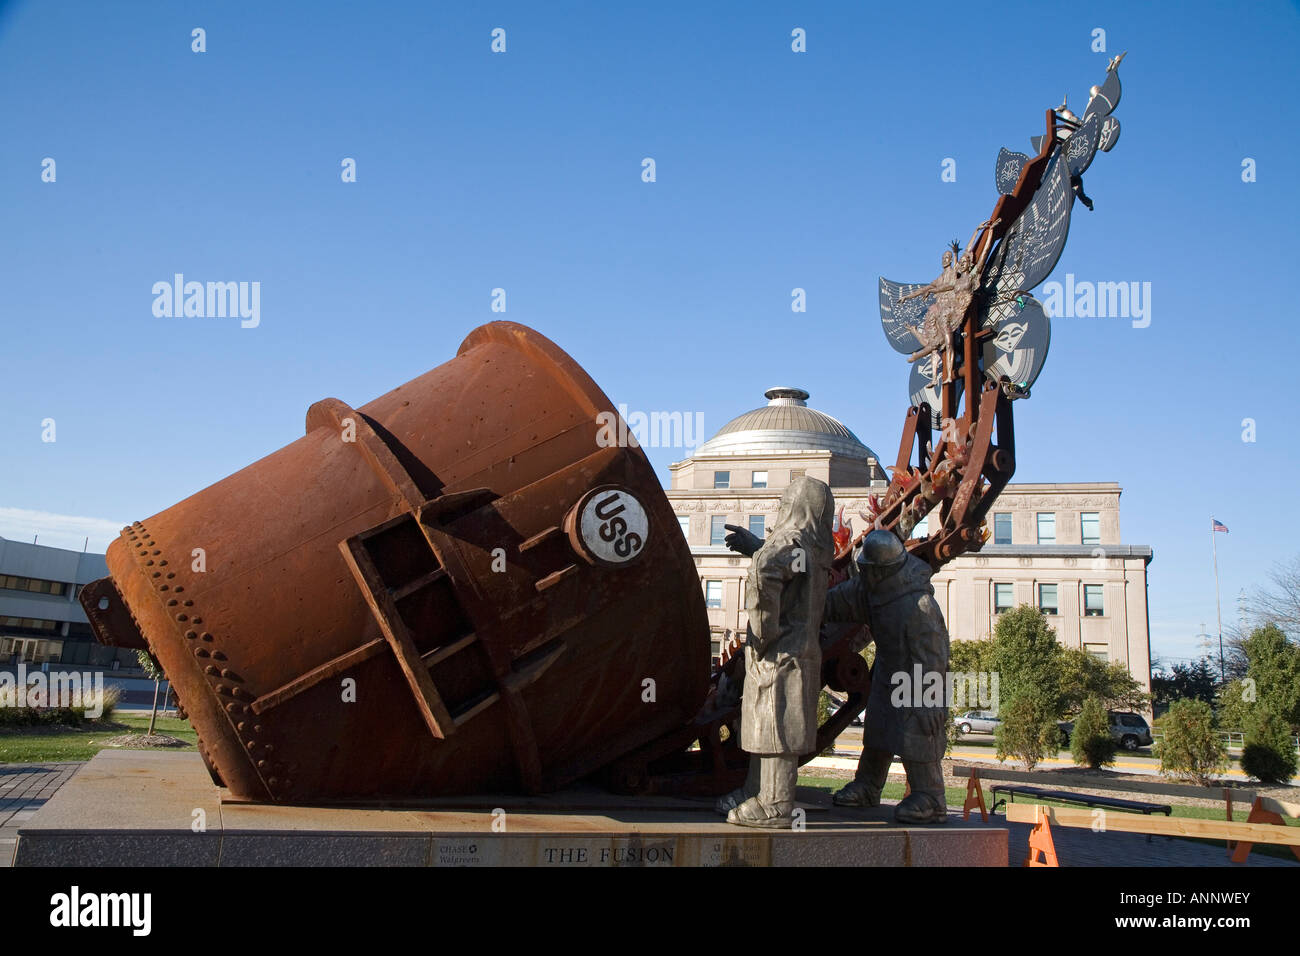 The Fusion Sculpture in Gary, Indiana Stock Photo